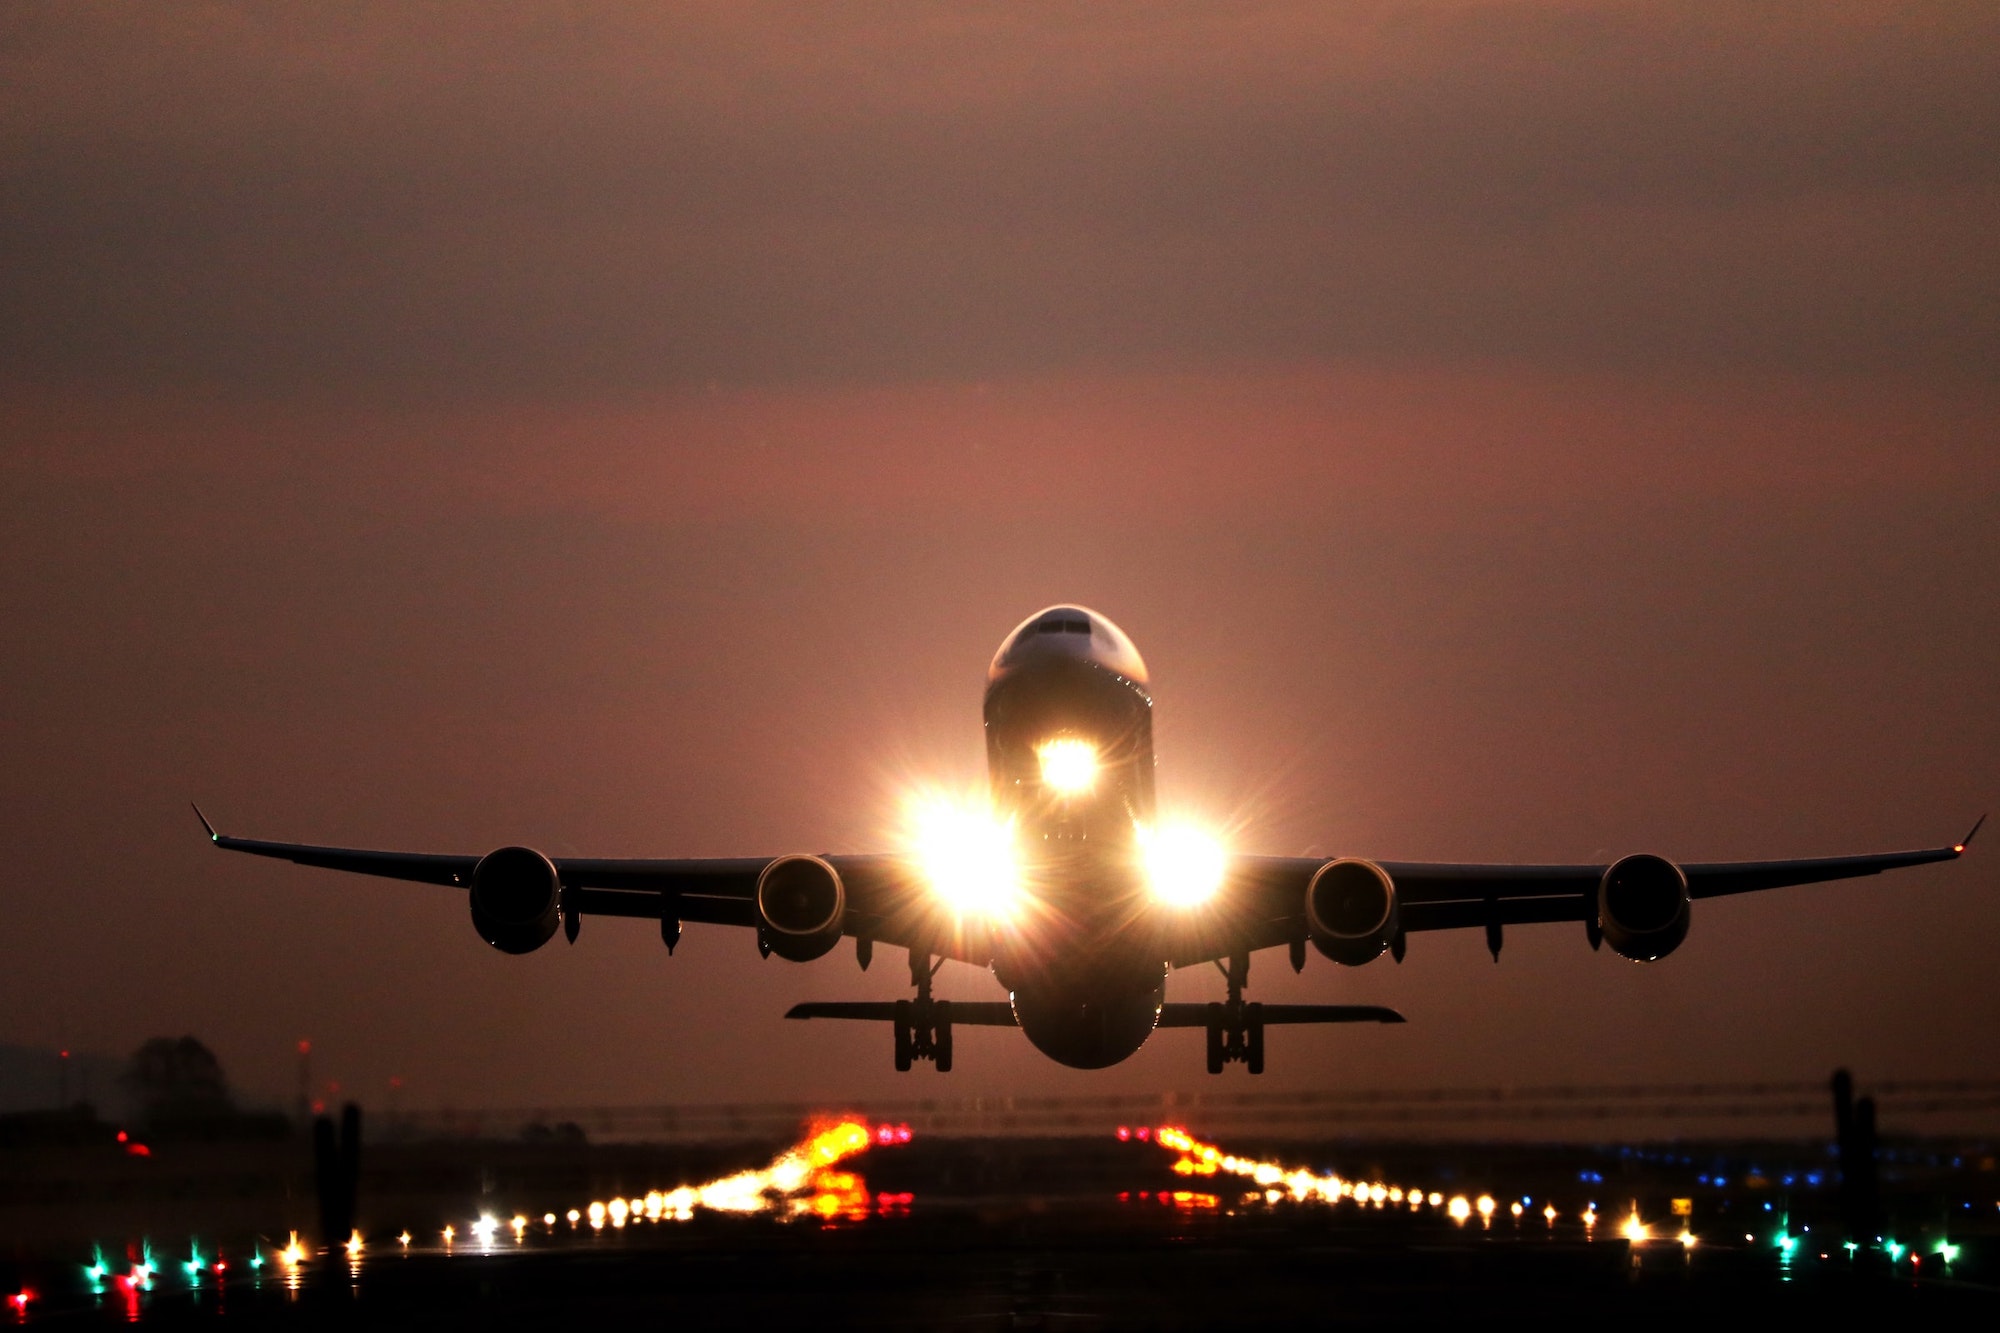 An airplane taking off toward the camera at dusk, with lights along the runway and on the front of the plane, against a cloudy reddish sunset.